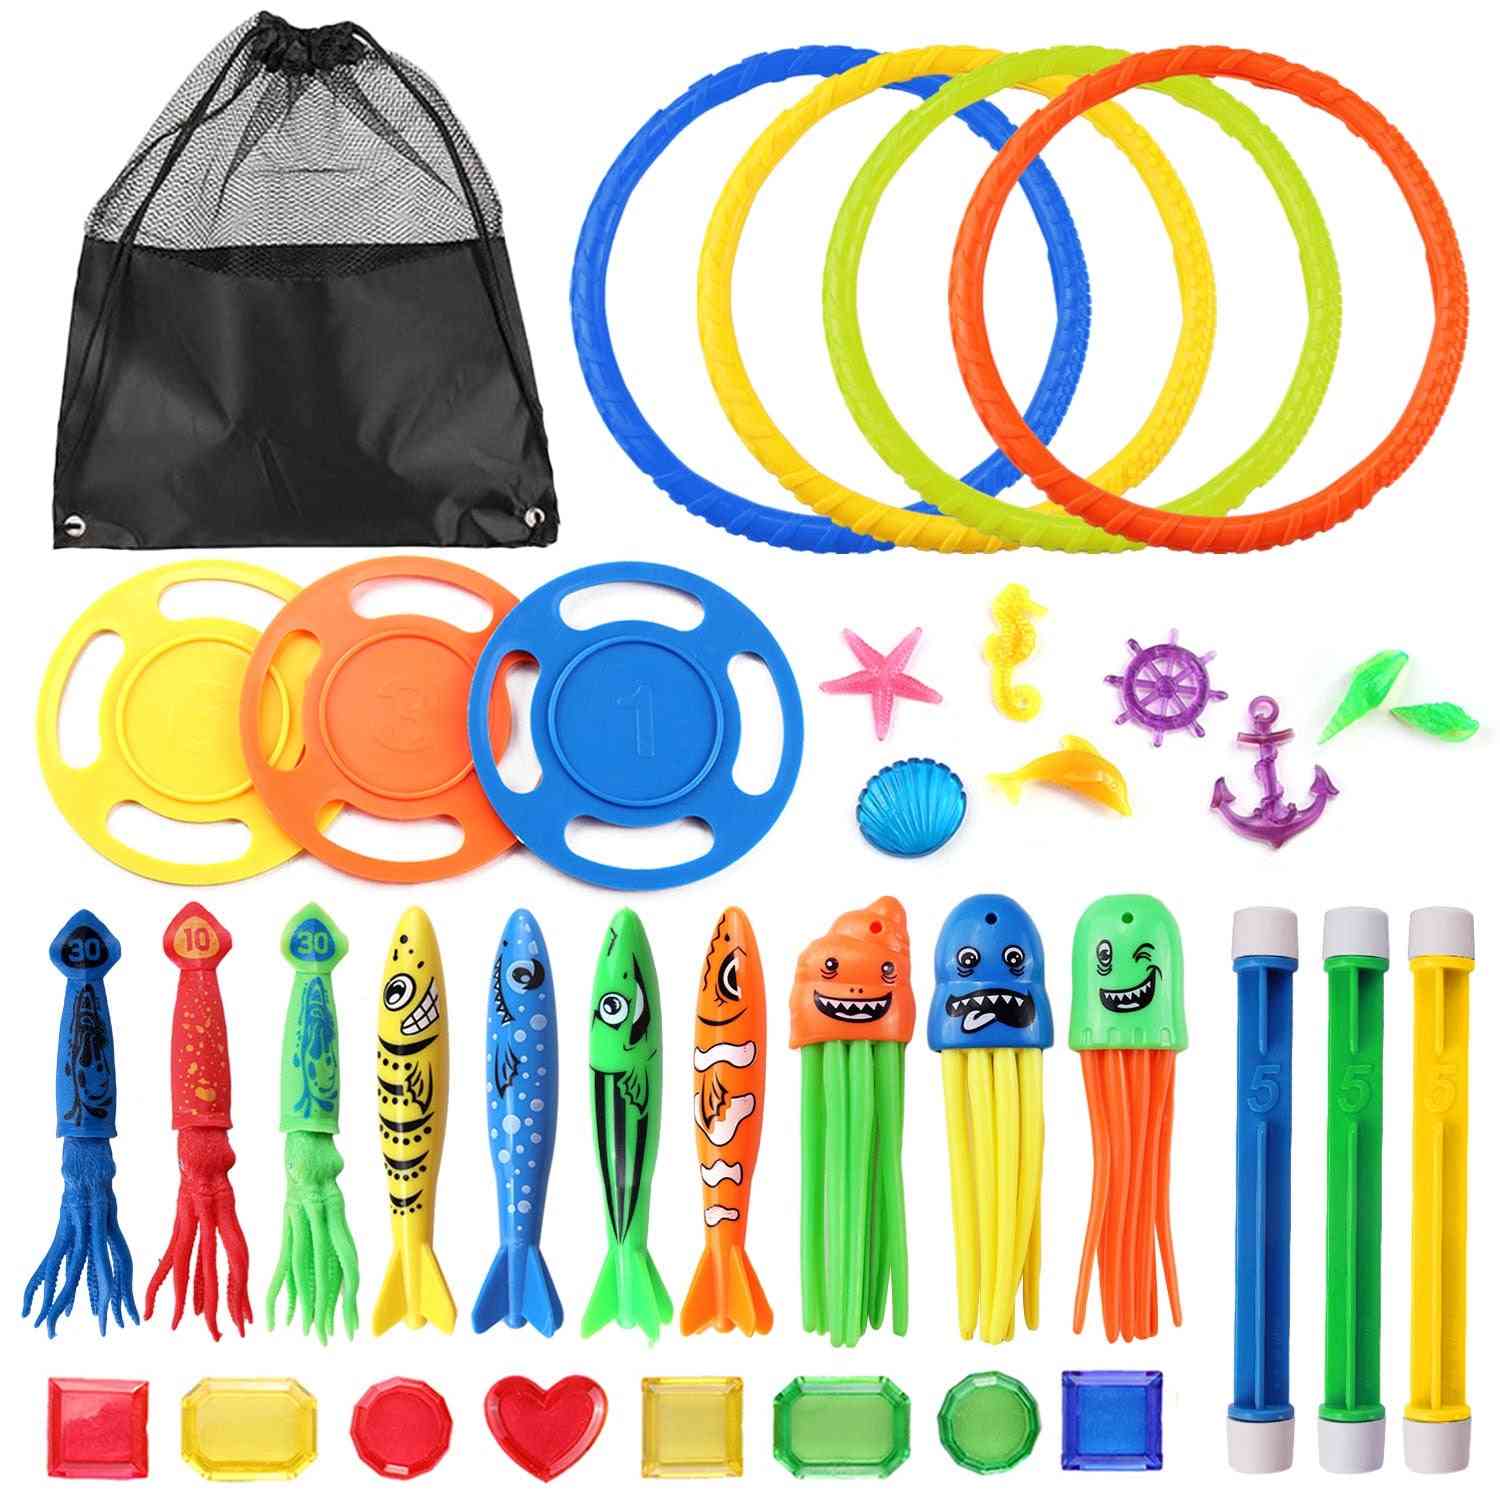 Funny Diving Set - Underwater Water Play With Storage Bag For /